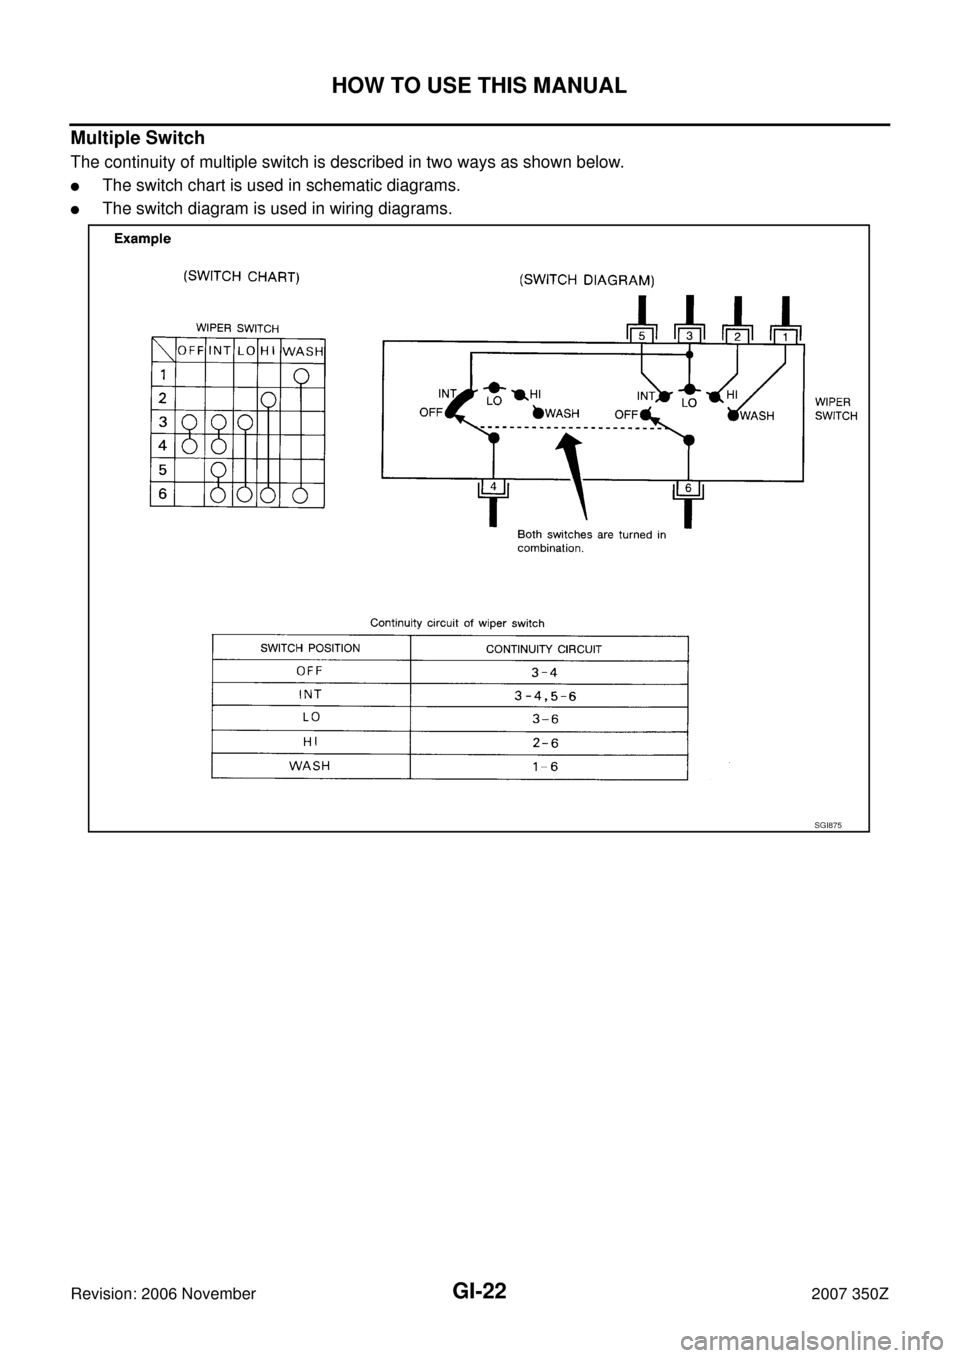 NISSAN 350Z 2007 Z33 General Information Workshop Manual GI-22
HOW TO USE THIS MANUAL
Revision: 2006 November2007 350Z
Multiple Switch 
The continuity of multiple switch is described in two ways as shown below.
The switch chart is used in schematic diagram